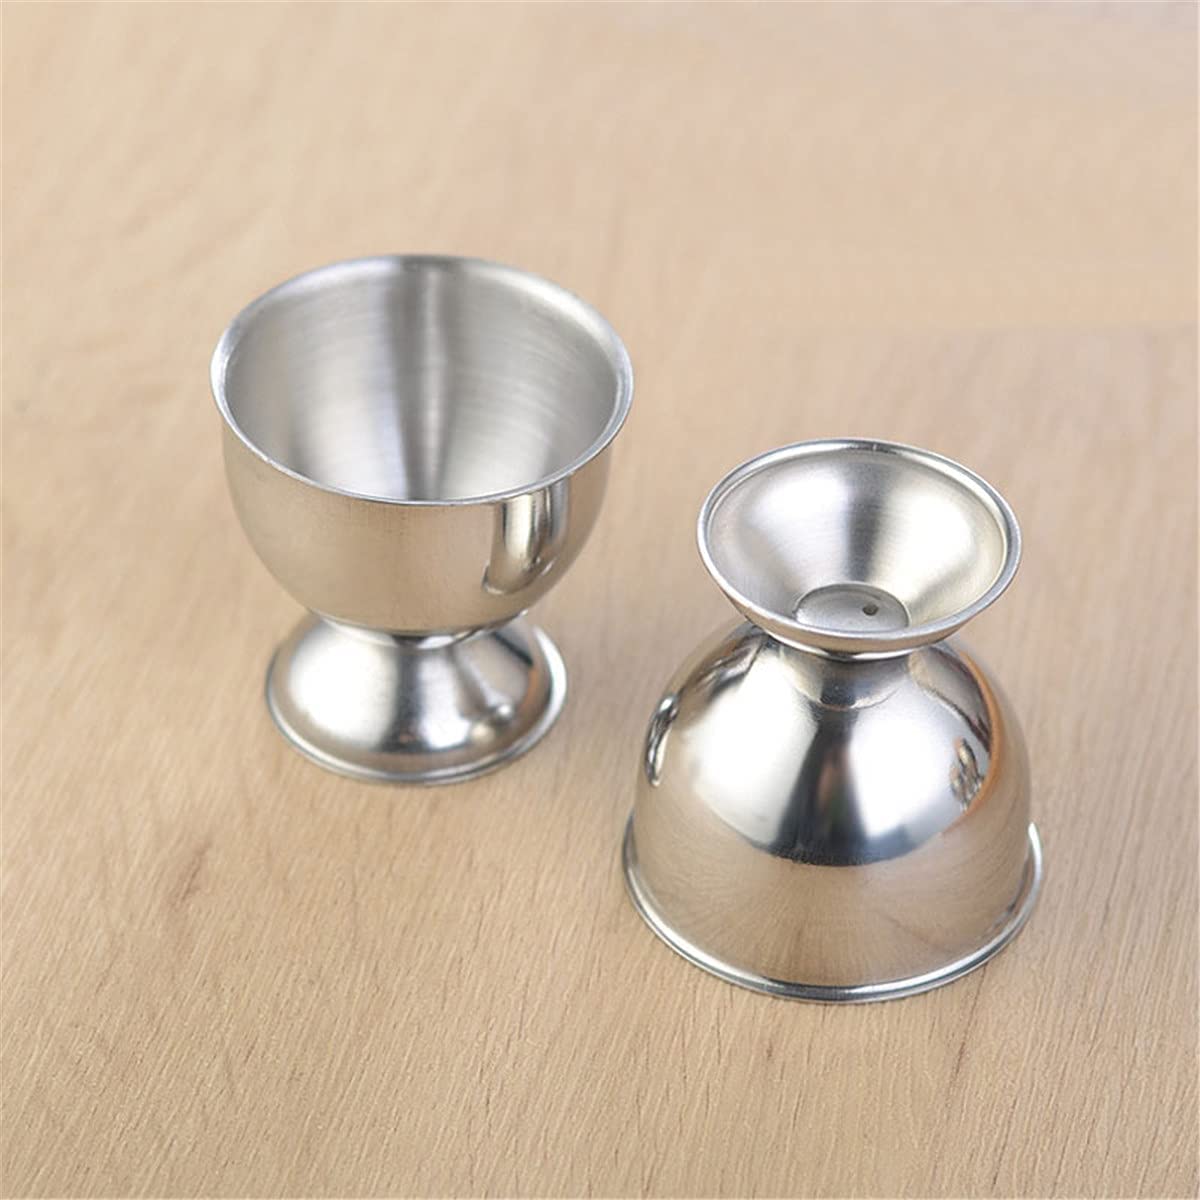 NJ 304 Stainless Steel Egg Cups Large : 12 Pcs